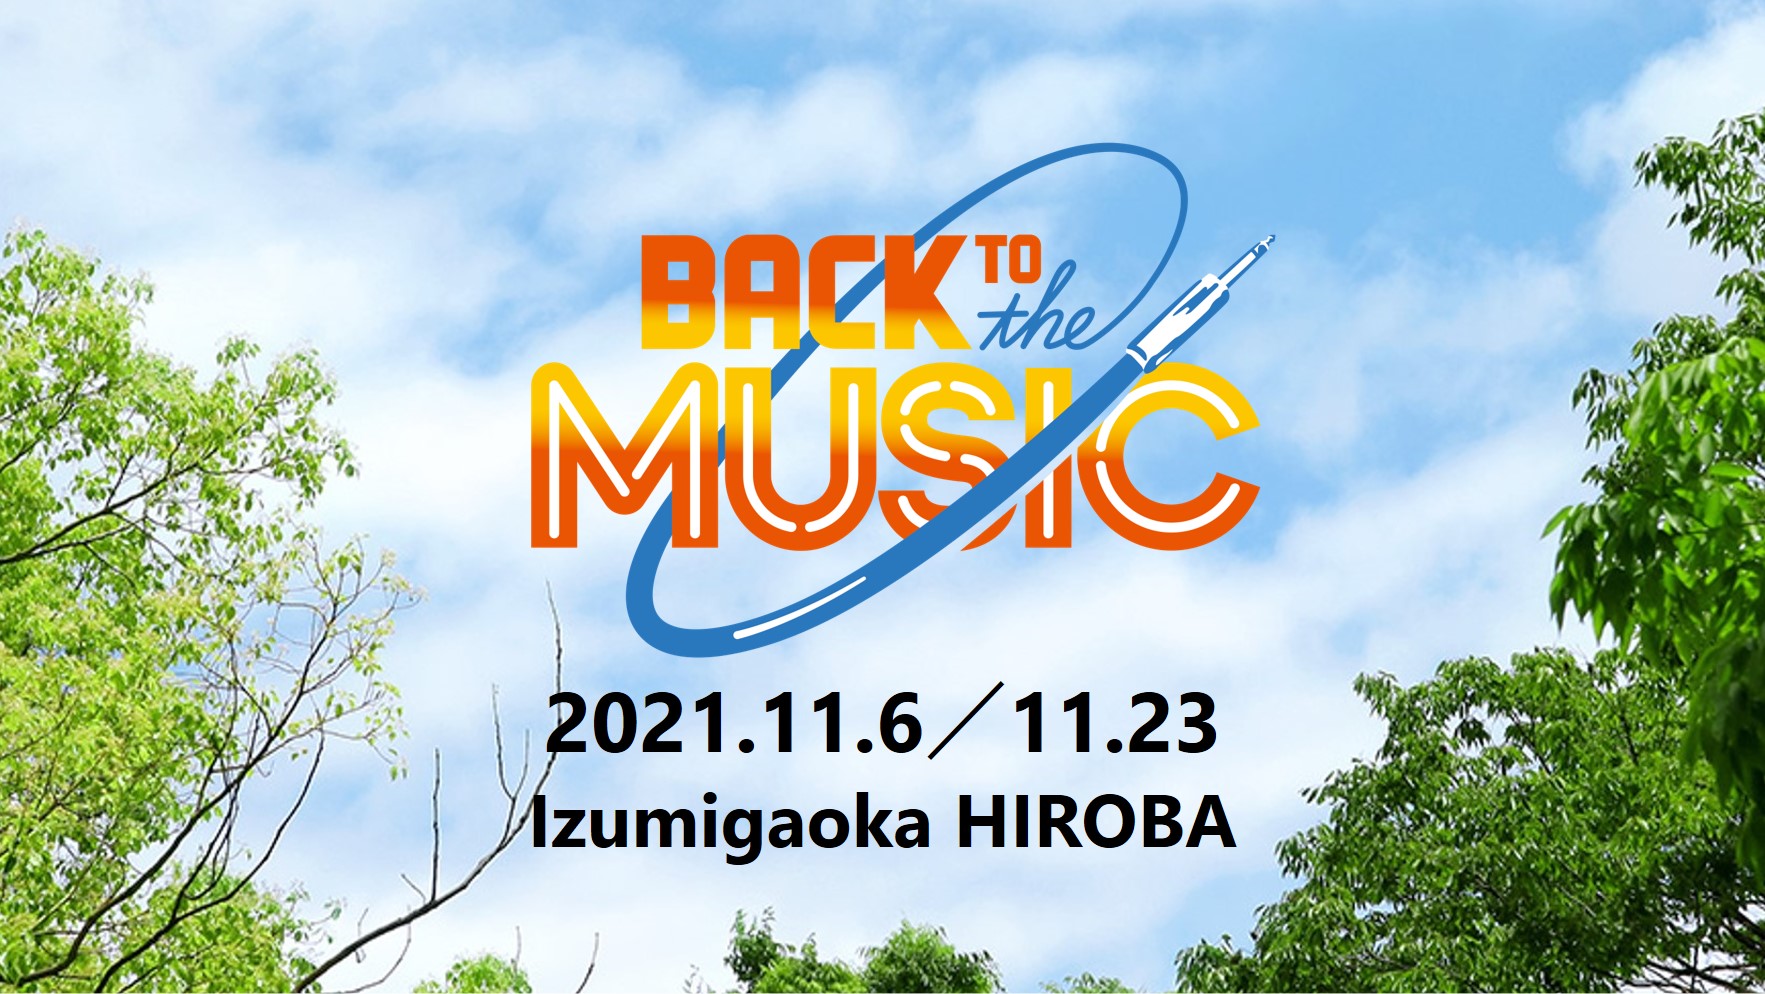 Back to the Musicロゴ